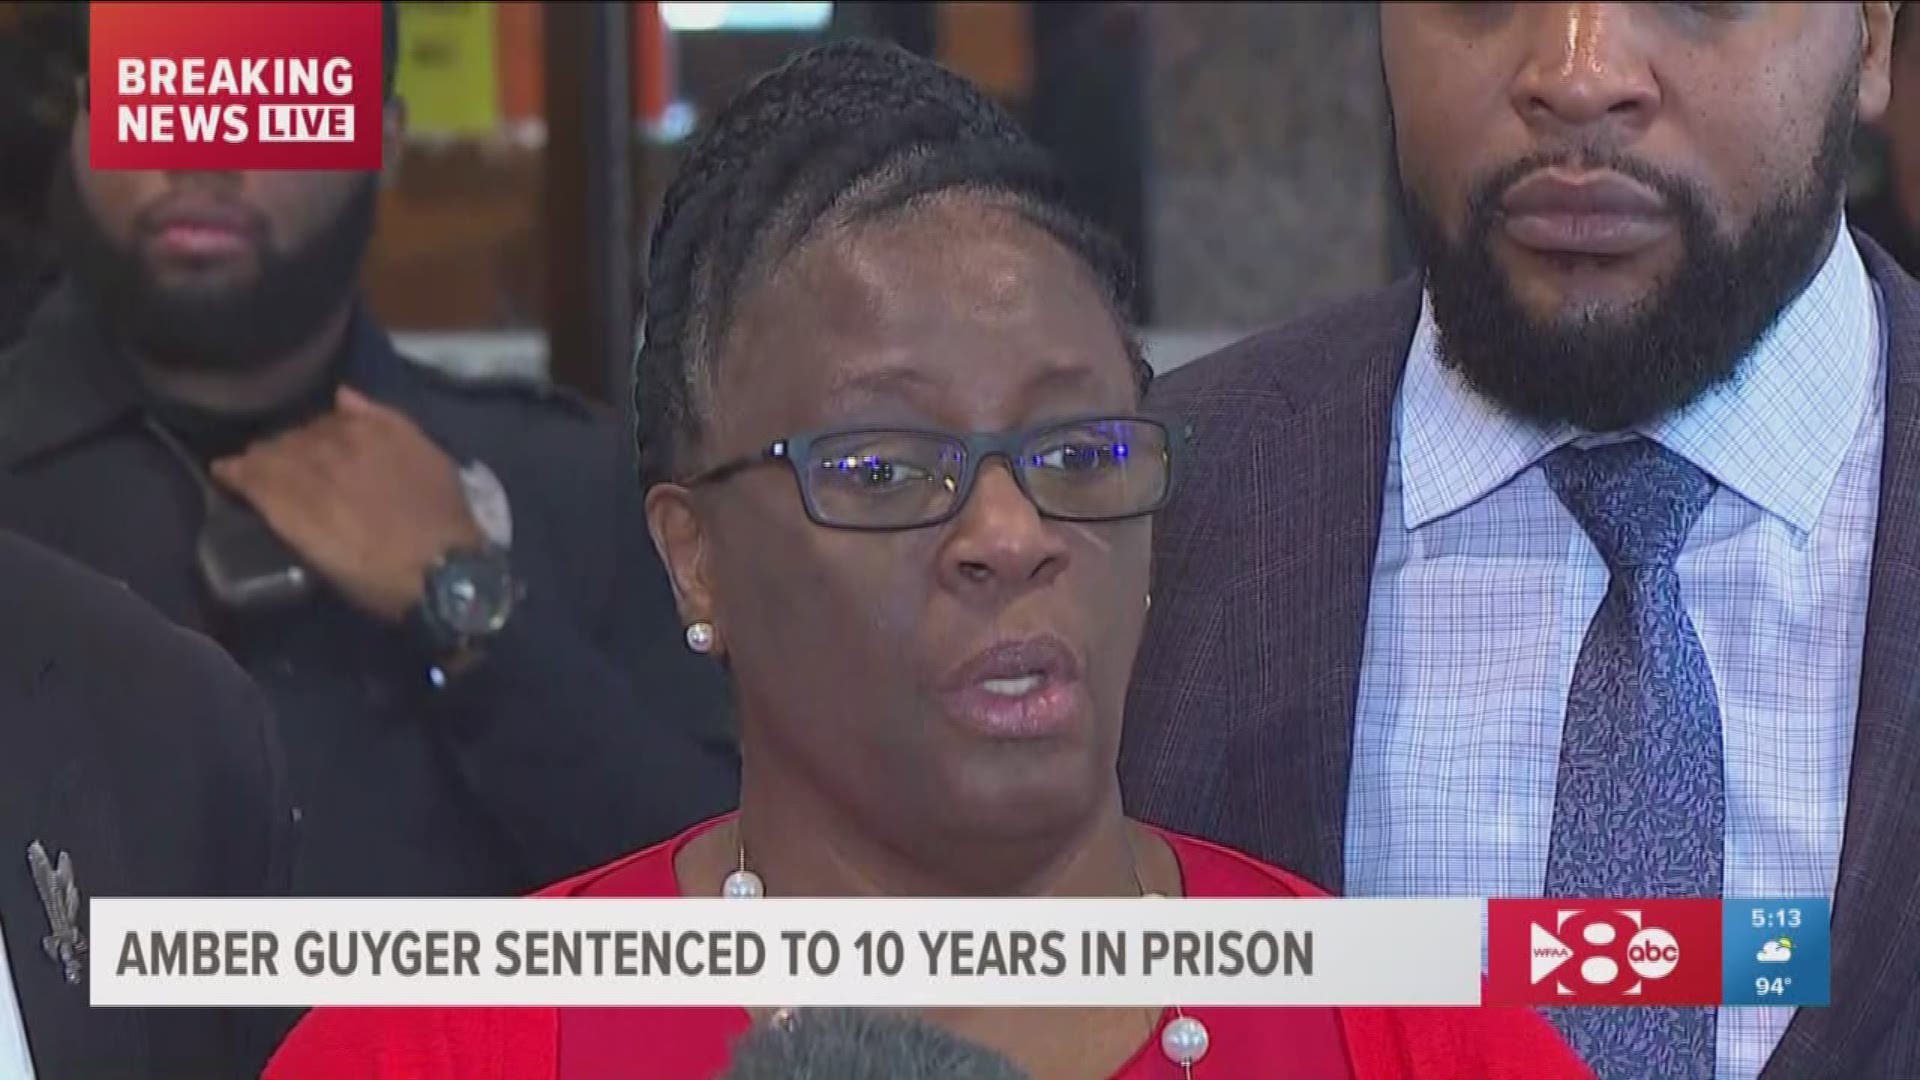 Botham Jean's mother Allison Jean addressed the public after Amber Guyger was sentenced Wednesday afternoon.